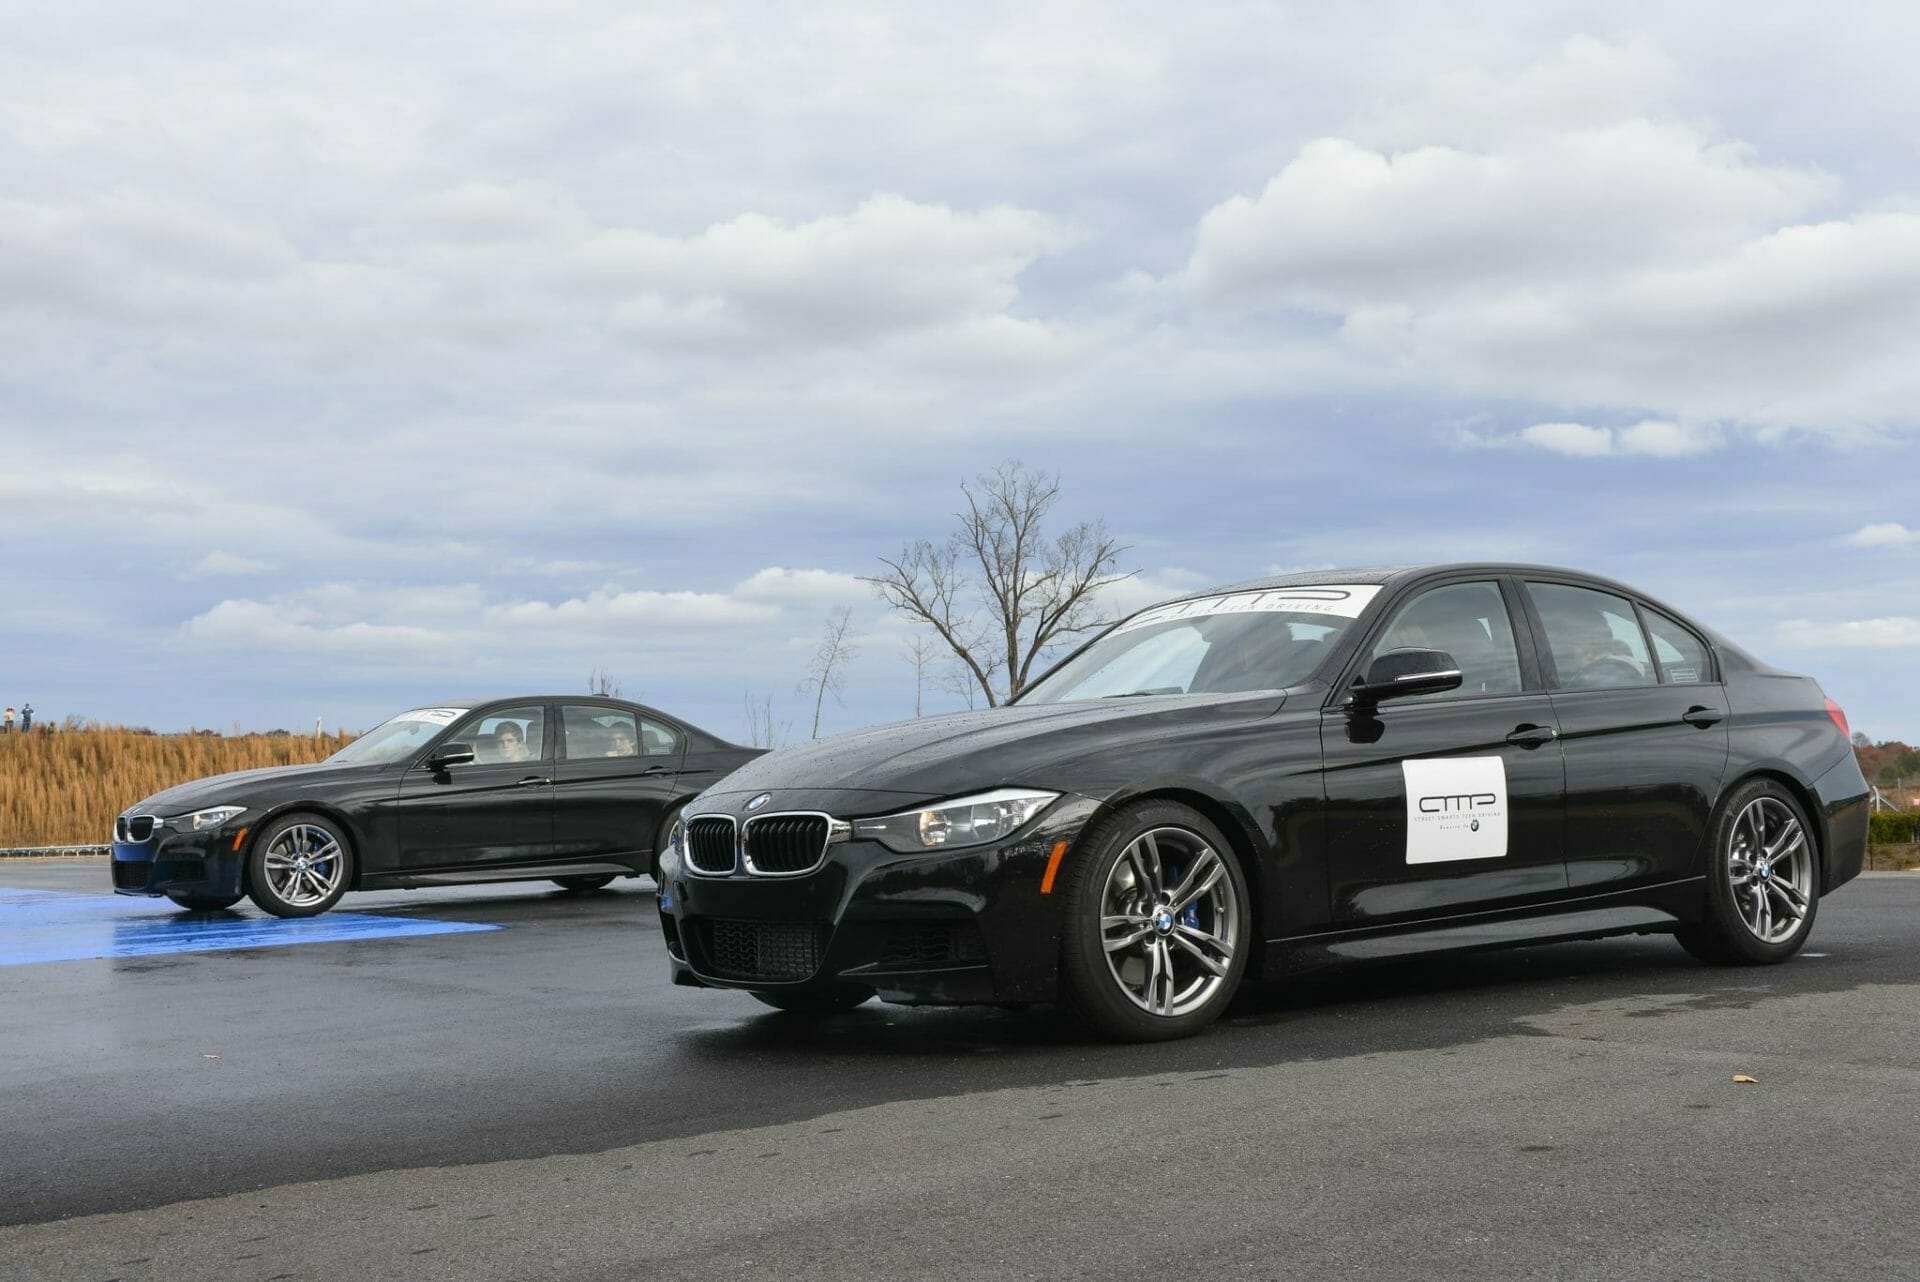 AMP TeenDriving FPP 2 - BMW Offers Exclusive Track Experience for Street Smarts Parents